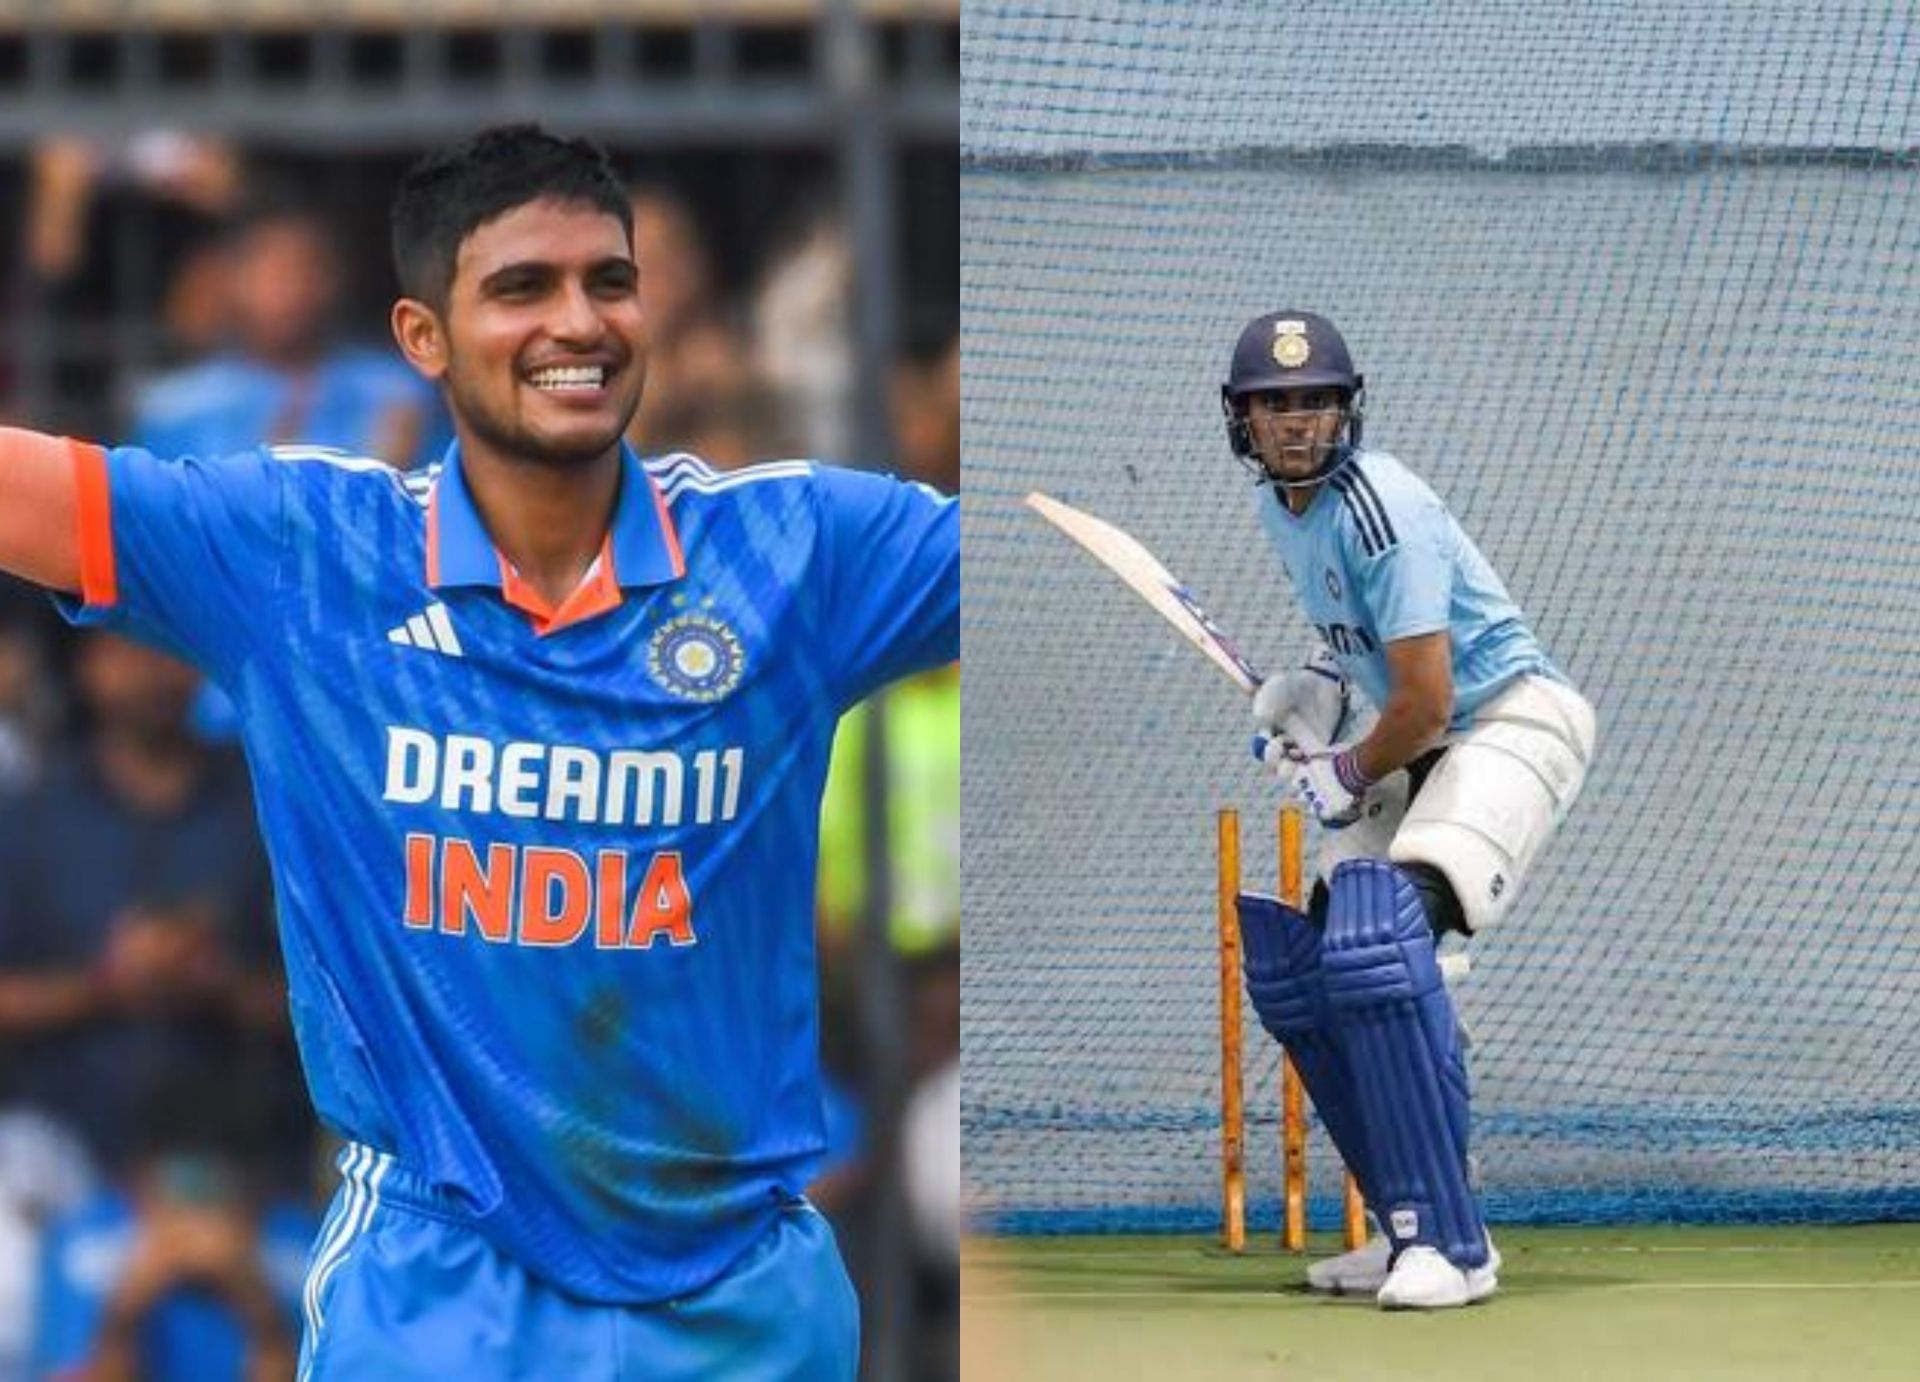 Shubman Gill will be eager to make a comeback after missing first two games of World Cup.